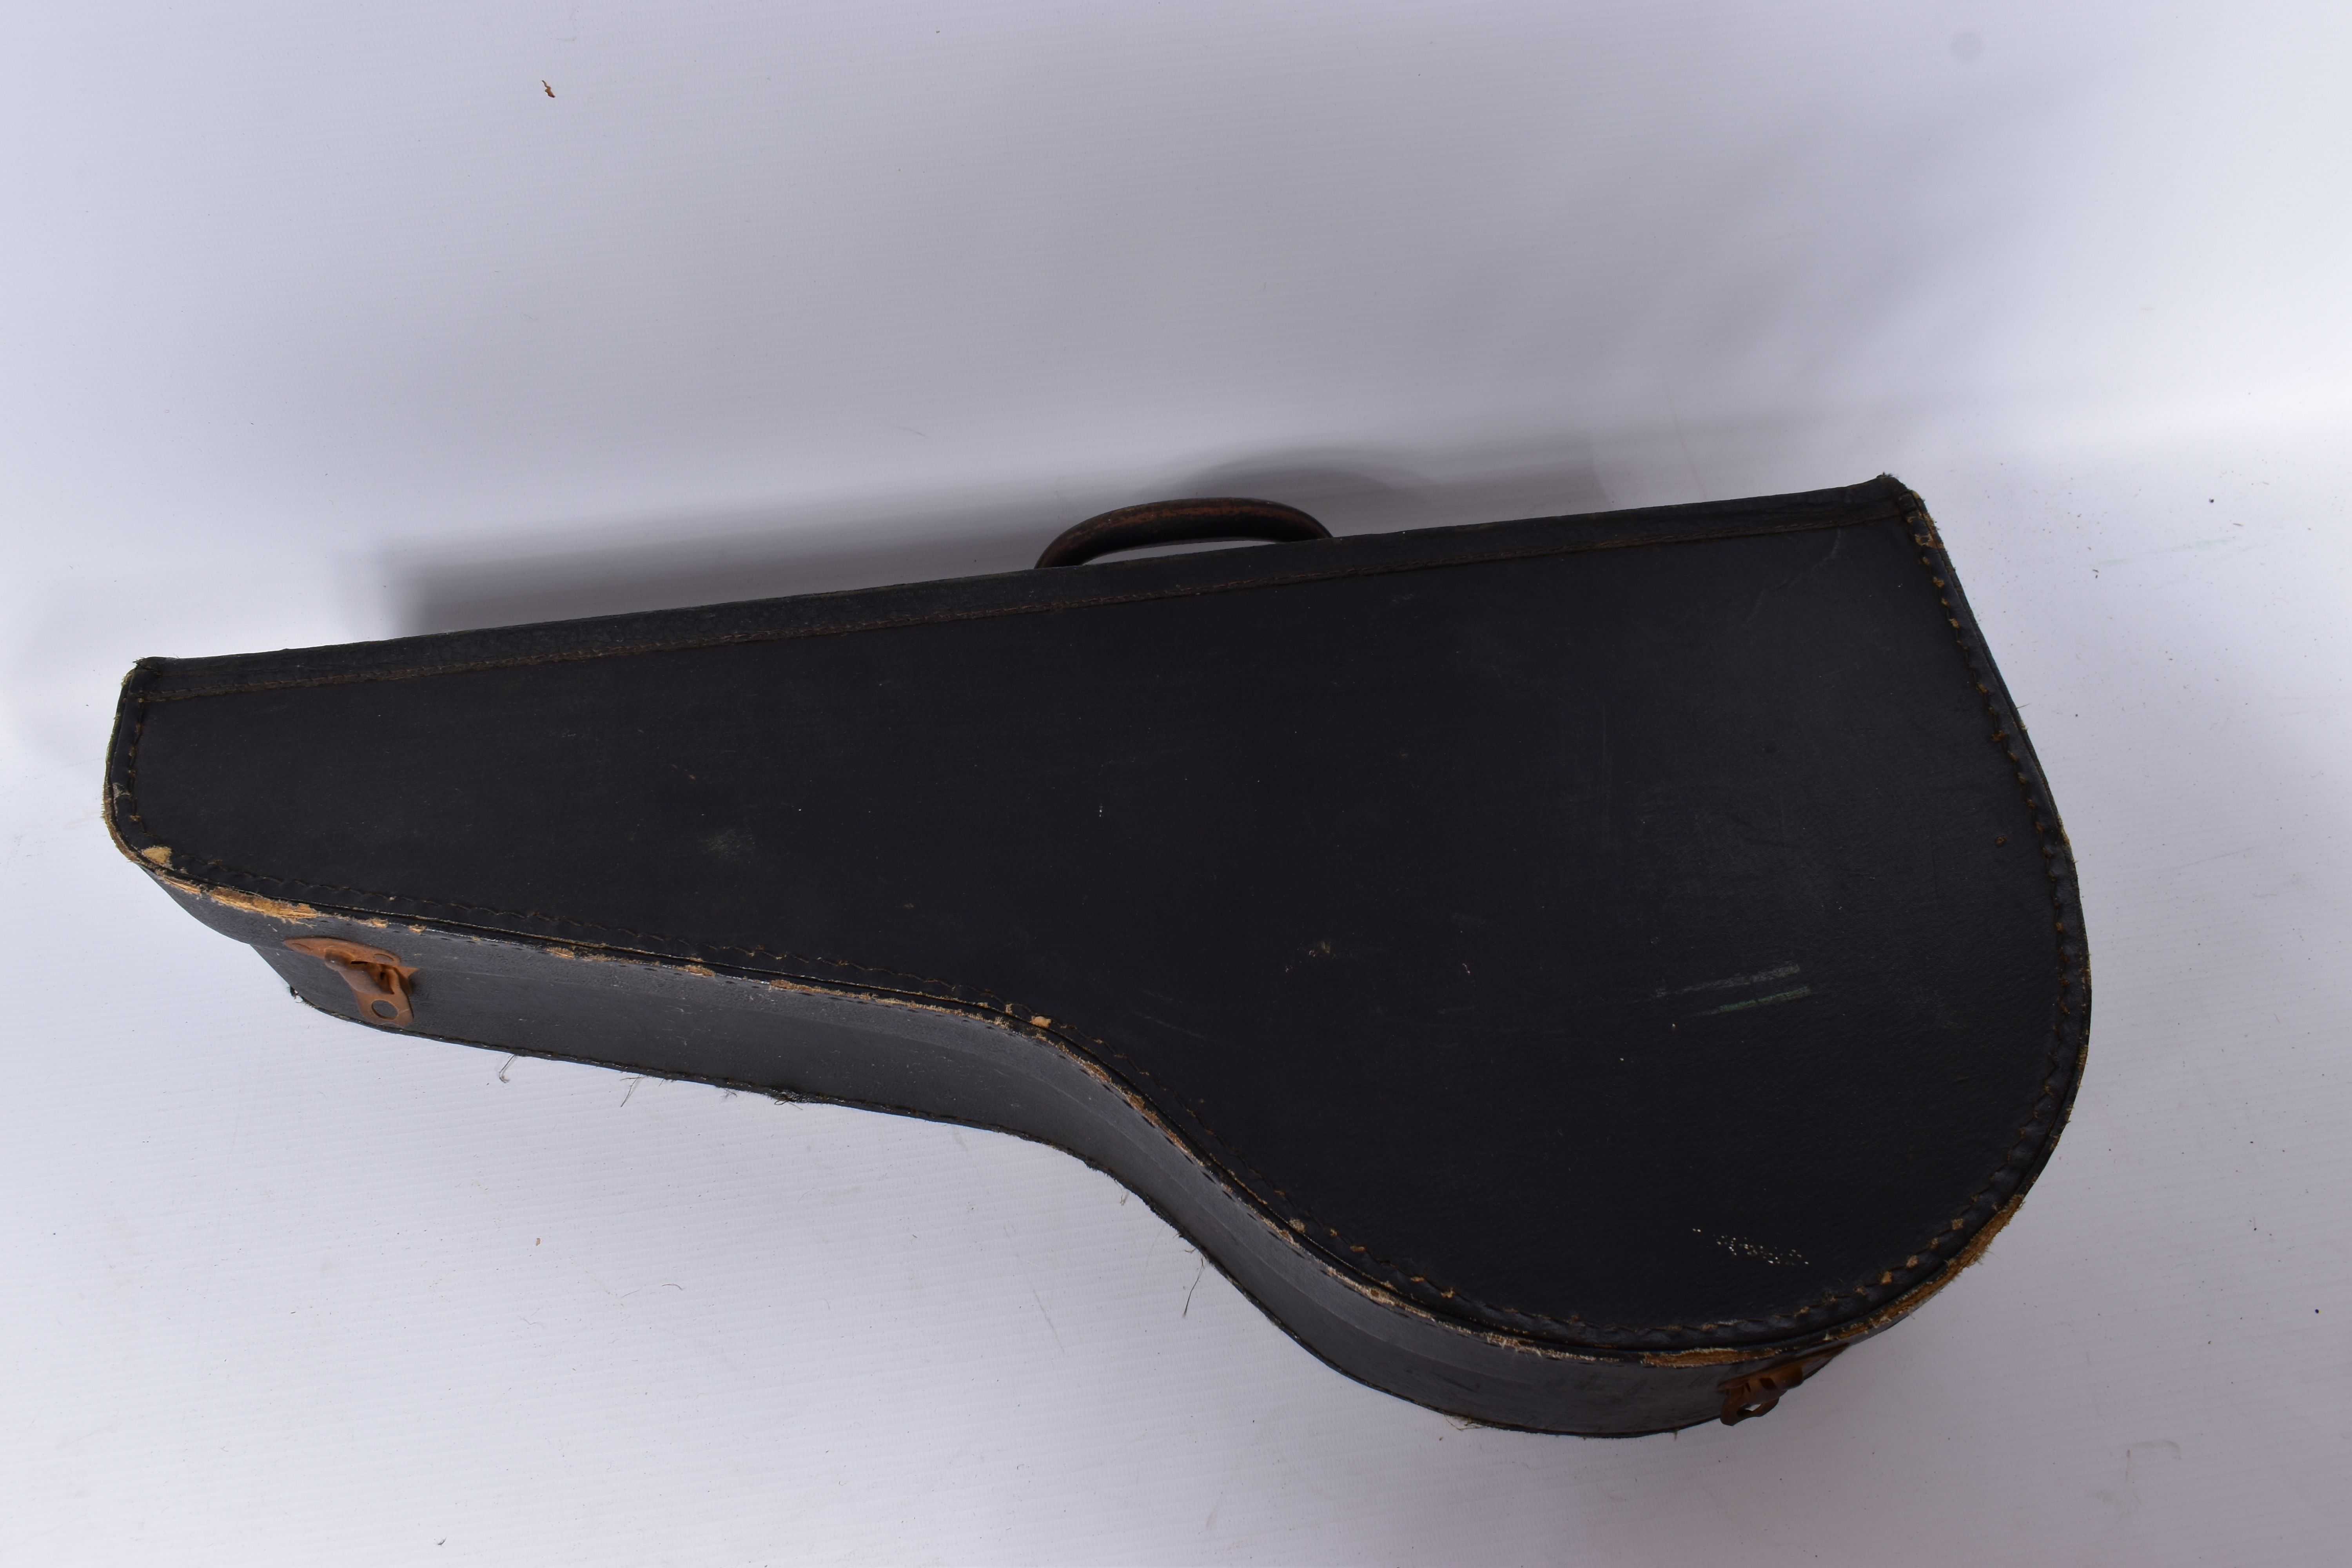 THE WHIRLE BY WINDSOR, BIRMINGHAM UKELELE BANJO 54cm long in fitted case - Image 5 of 6